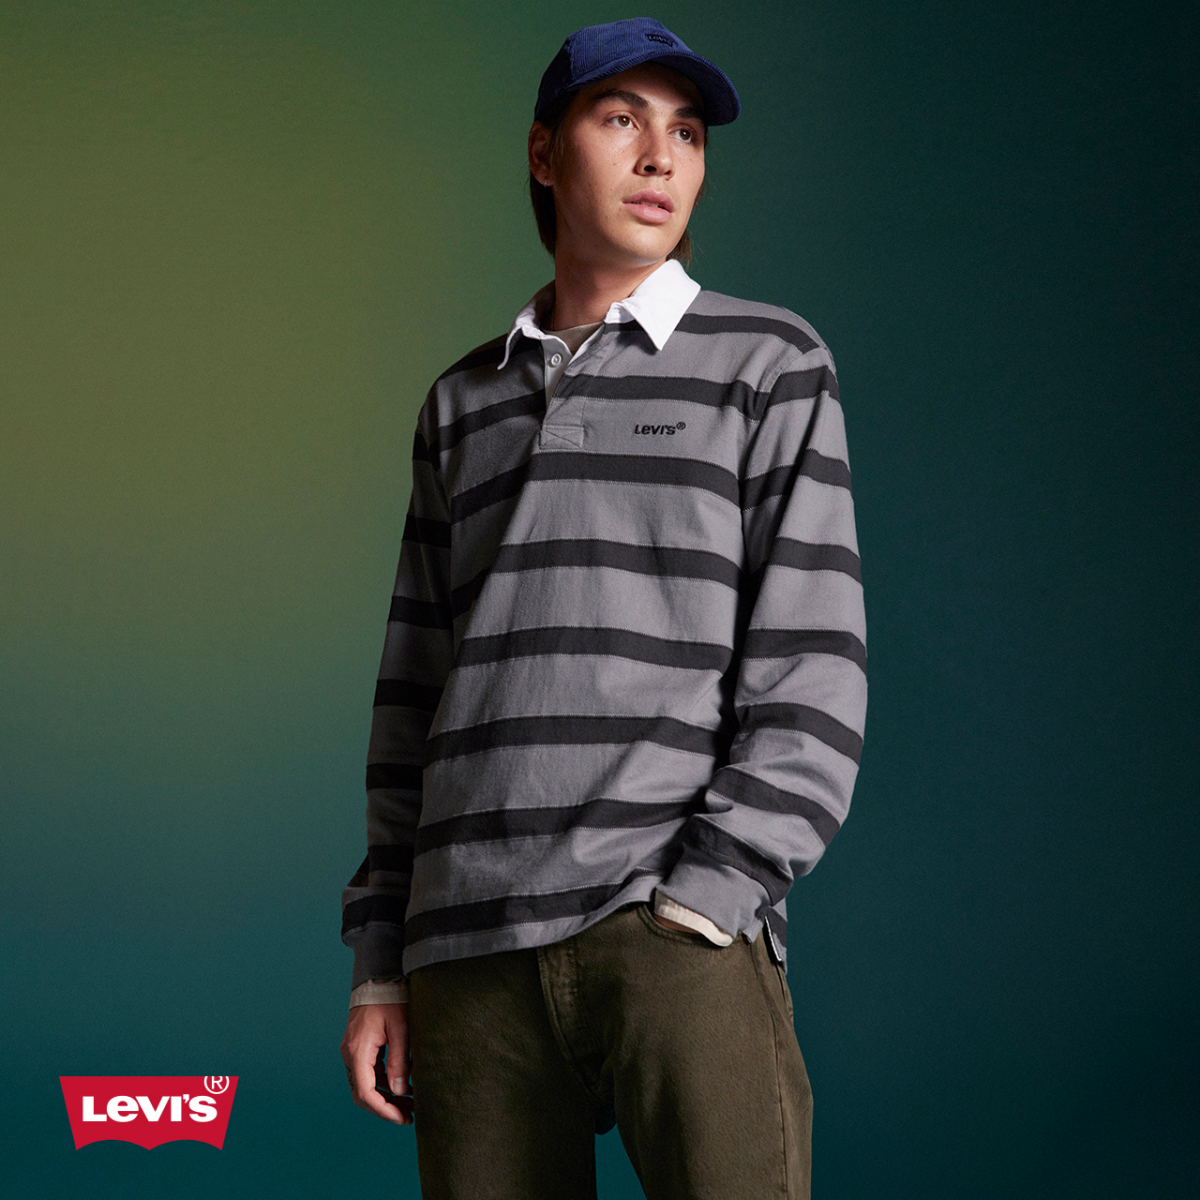 Tops & Outerwear 40% off when you buy 2 or more from Levi's